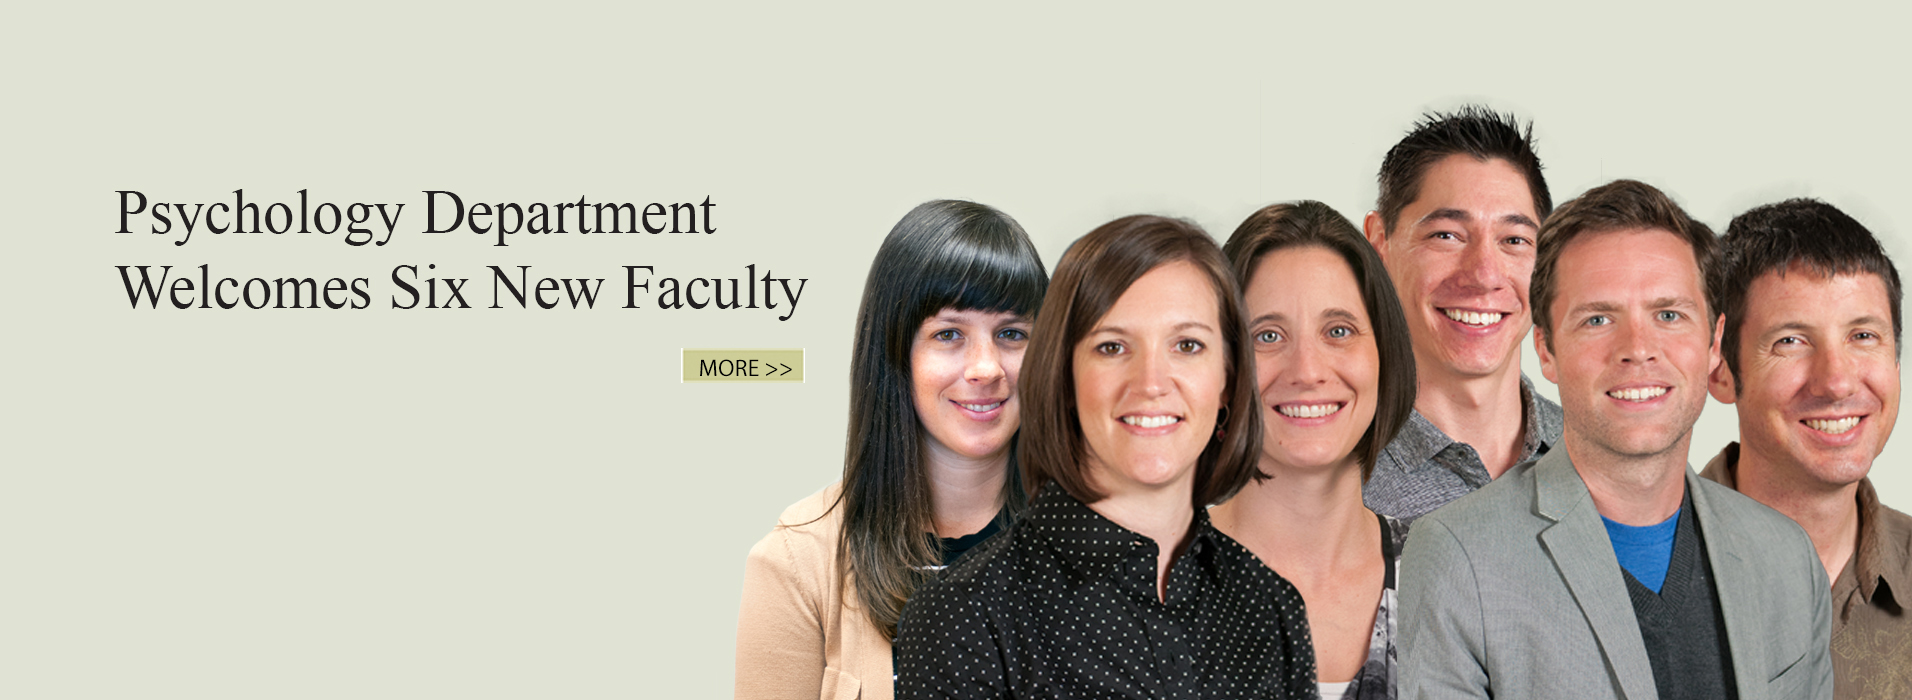 New Faculty graphic